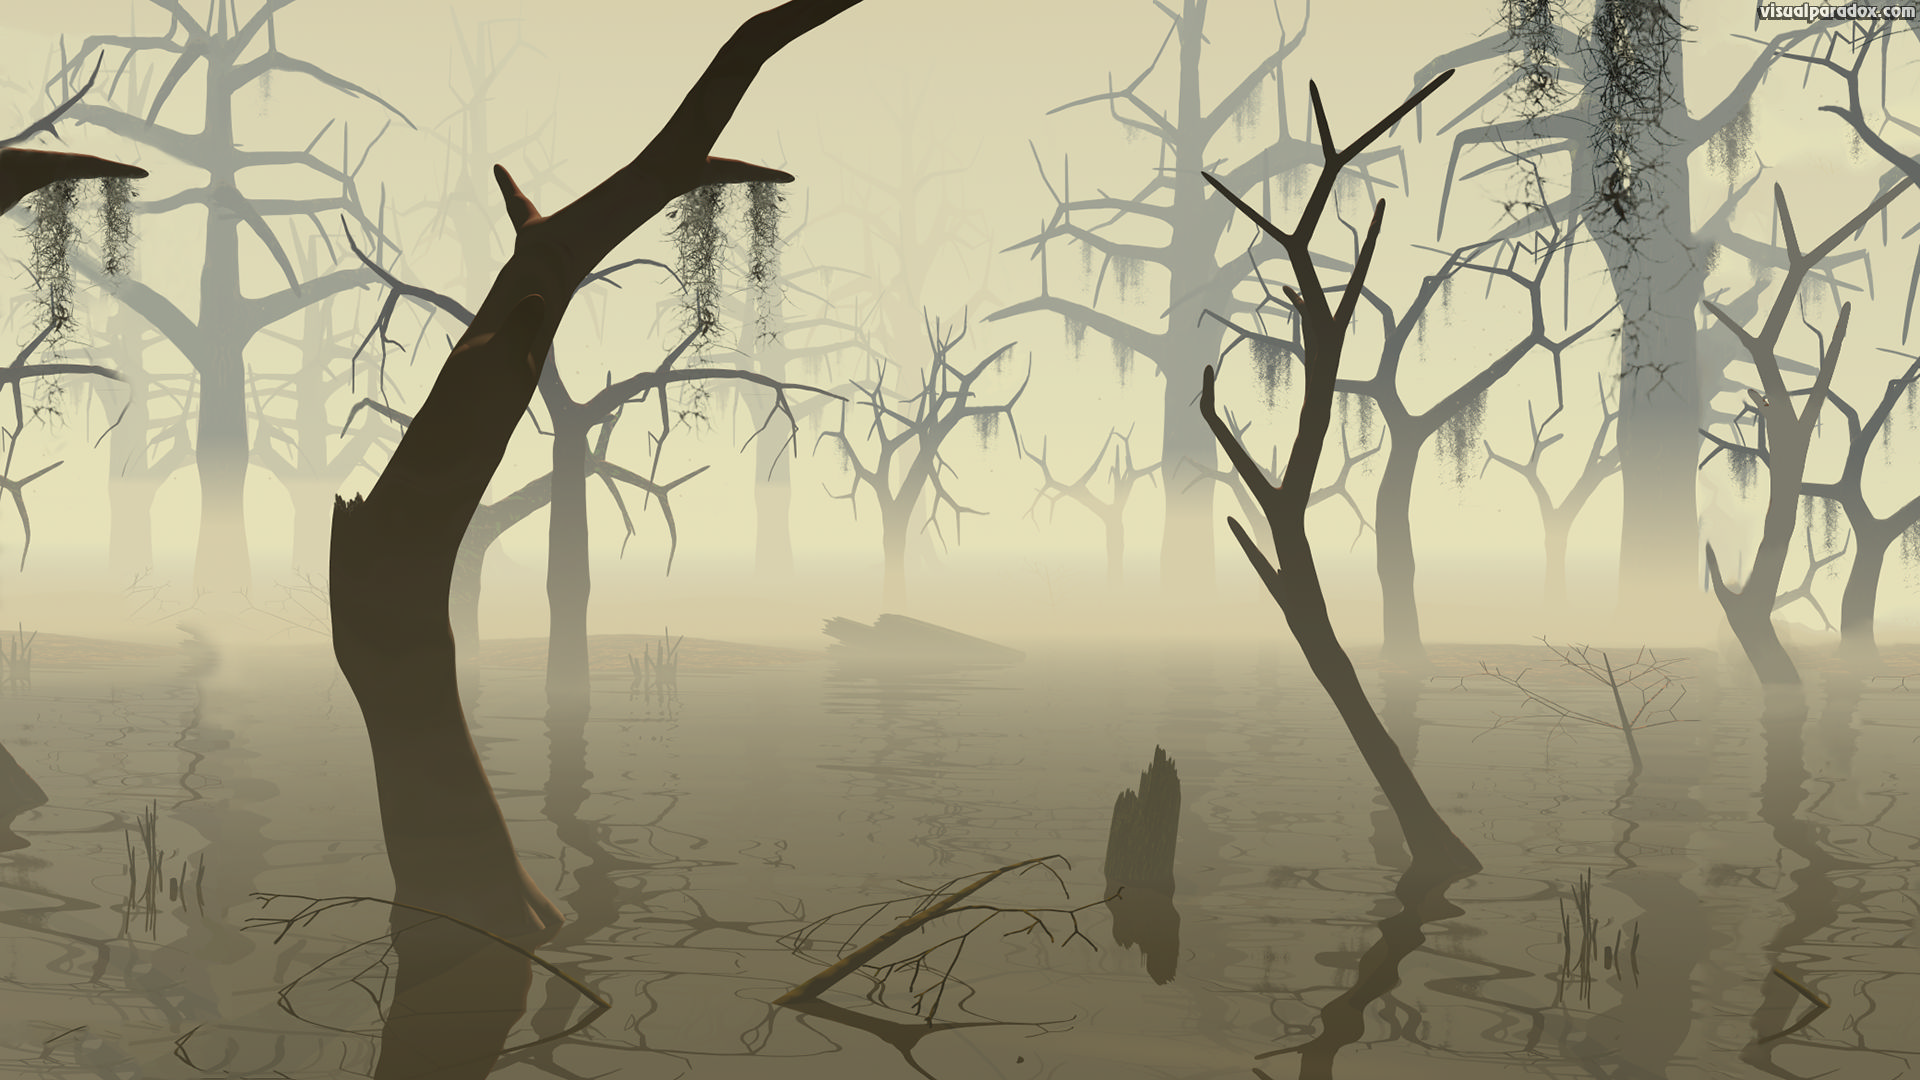 marsh, wetland, watershed, flood, quagmire,everglades, trees, forest, bottoms, dead, decay, forboding, scary, creepy, 3d, wallpaper